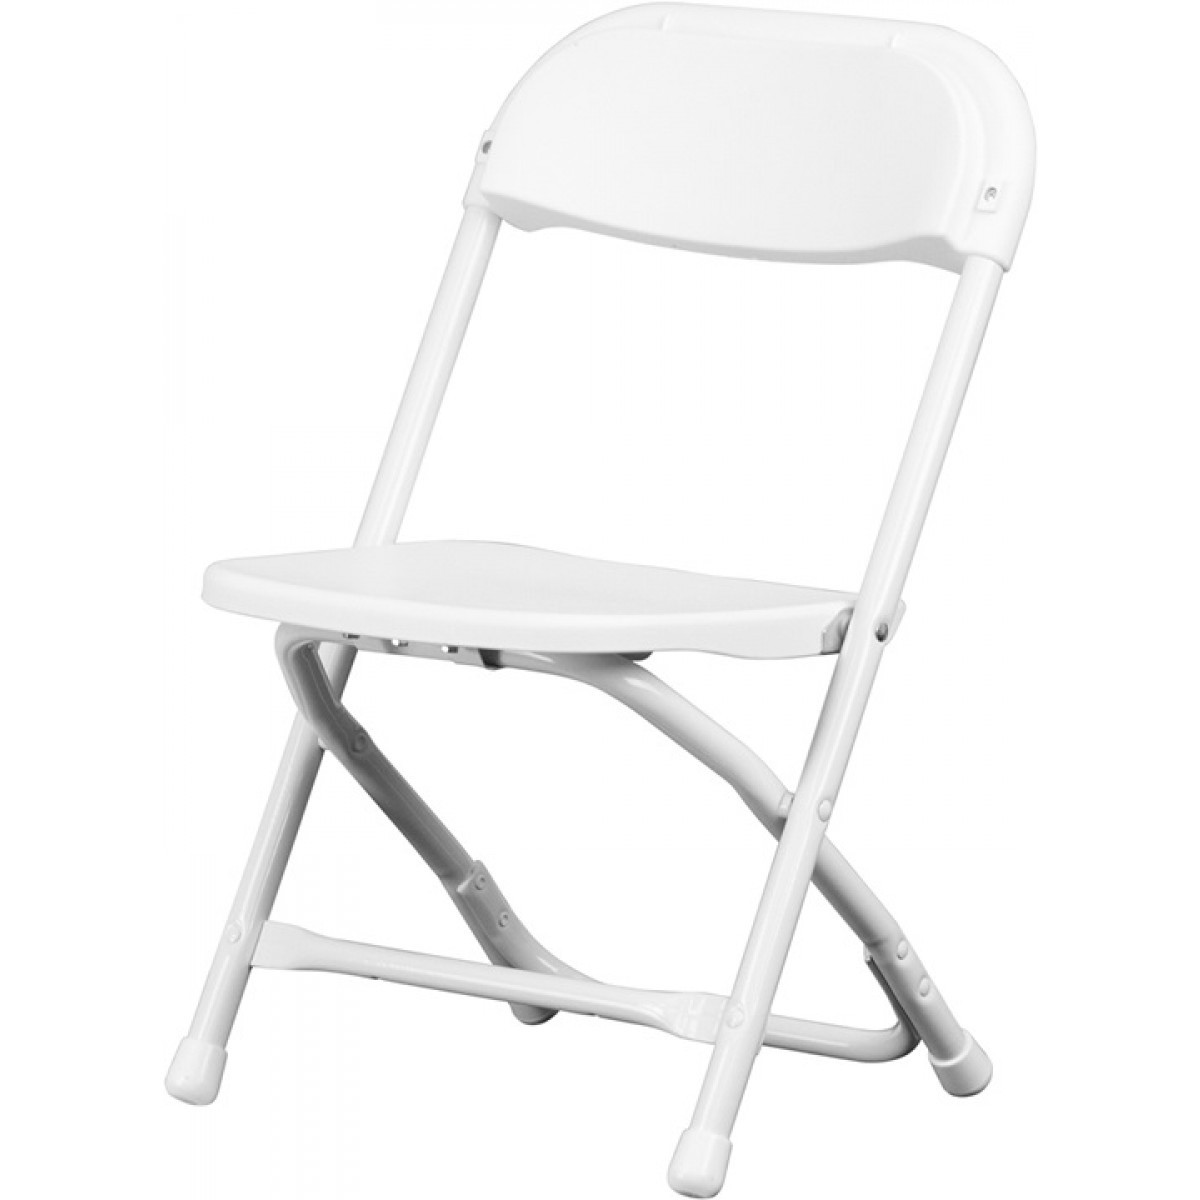 Kids Foldable Chair
 Child Size Chair Kids Plastic Folding Chair in White